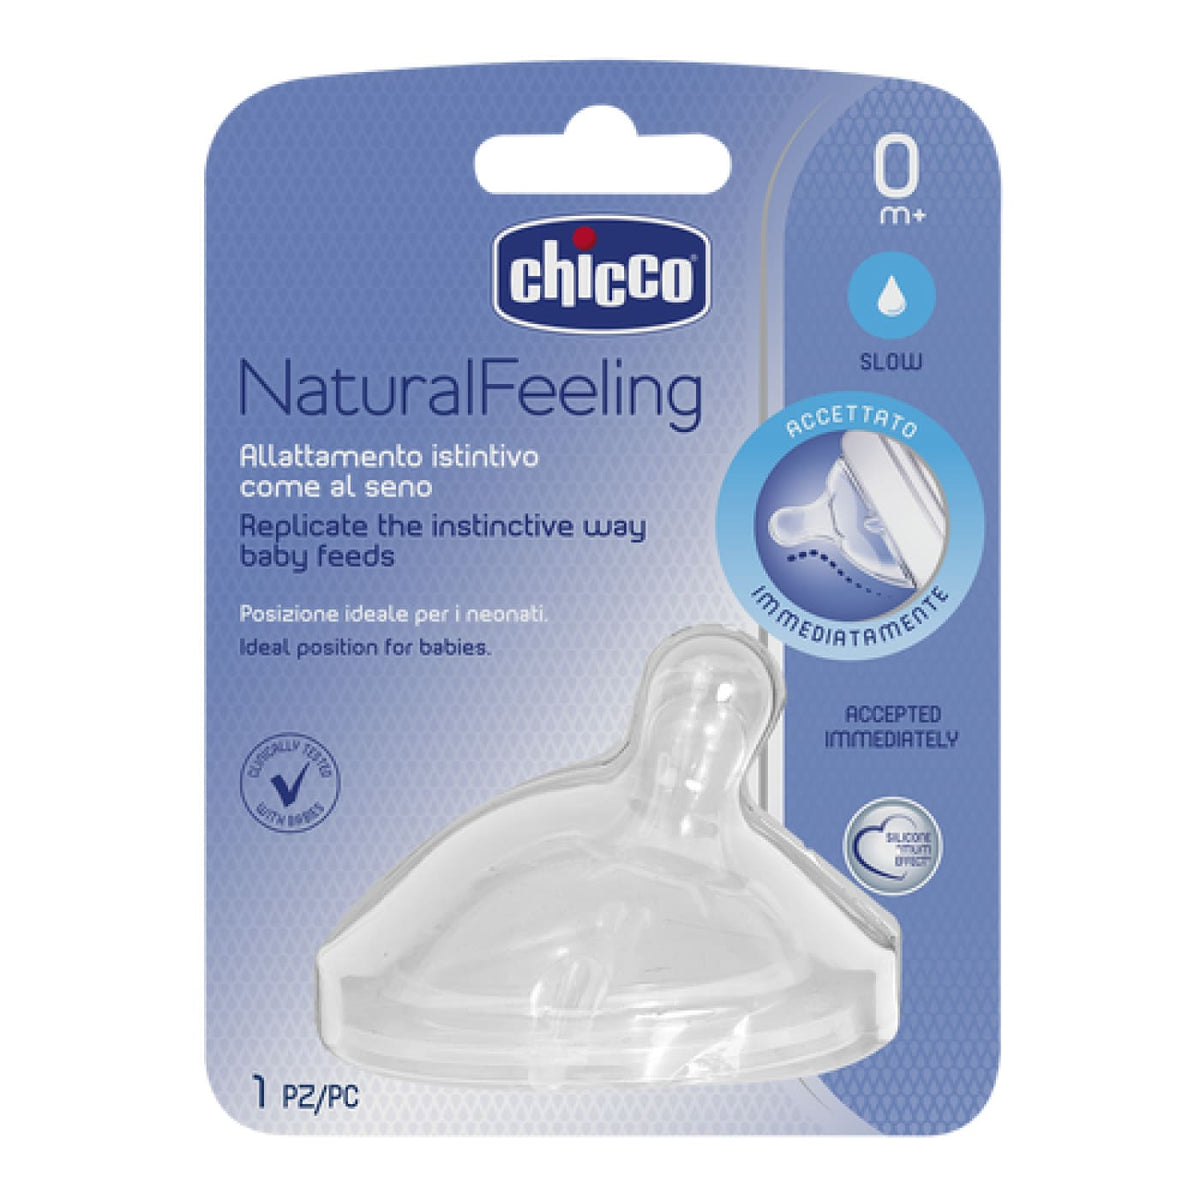 Chicco Natural Feeling Silicone Teat 0M+ - Regular Flow - NURSING &amp; FEEDING - BOTTLE ACCESSORIES